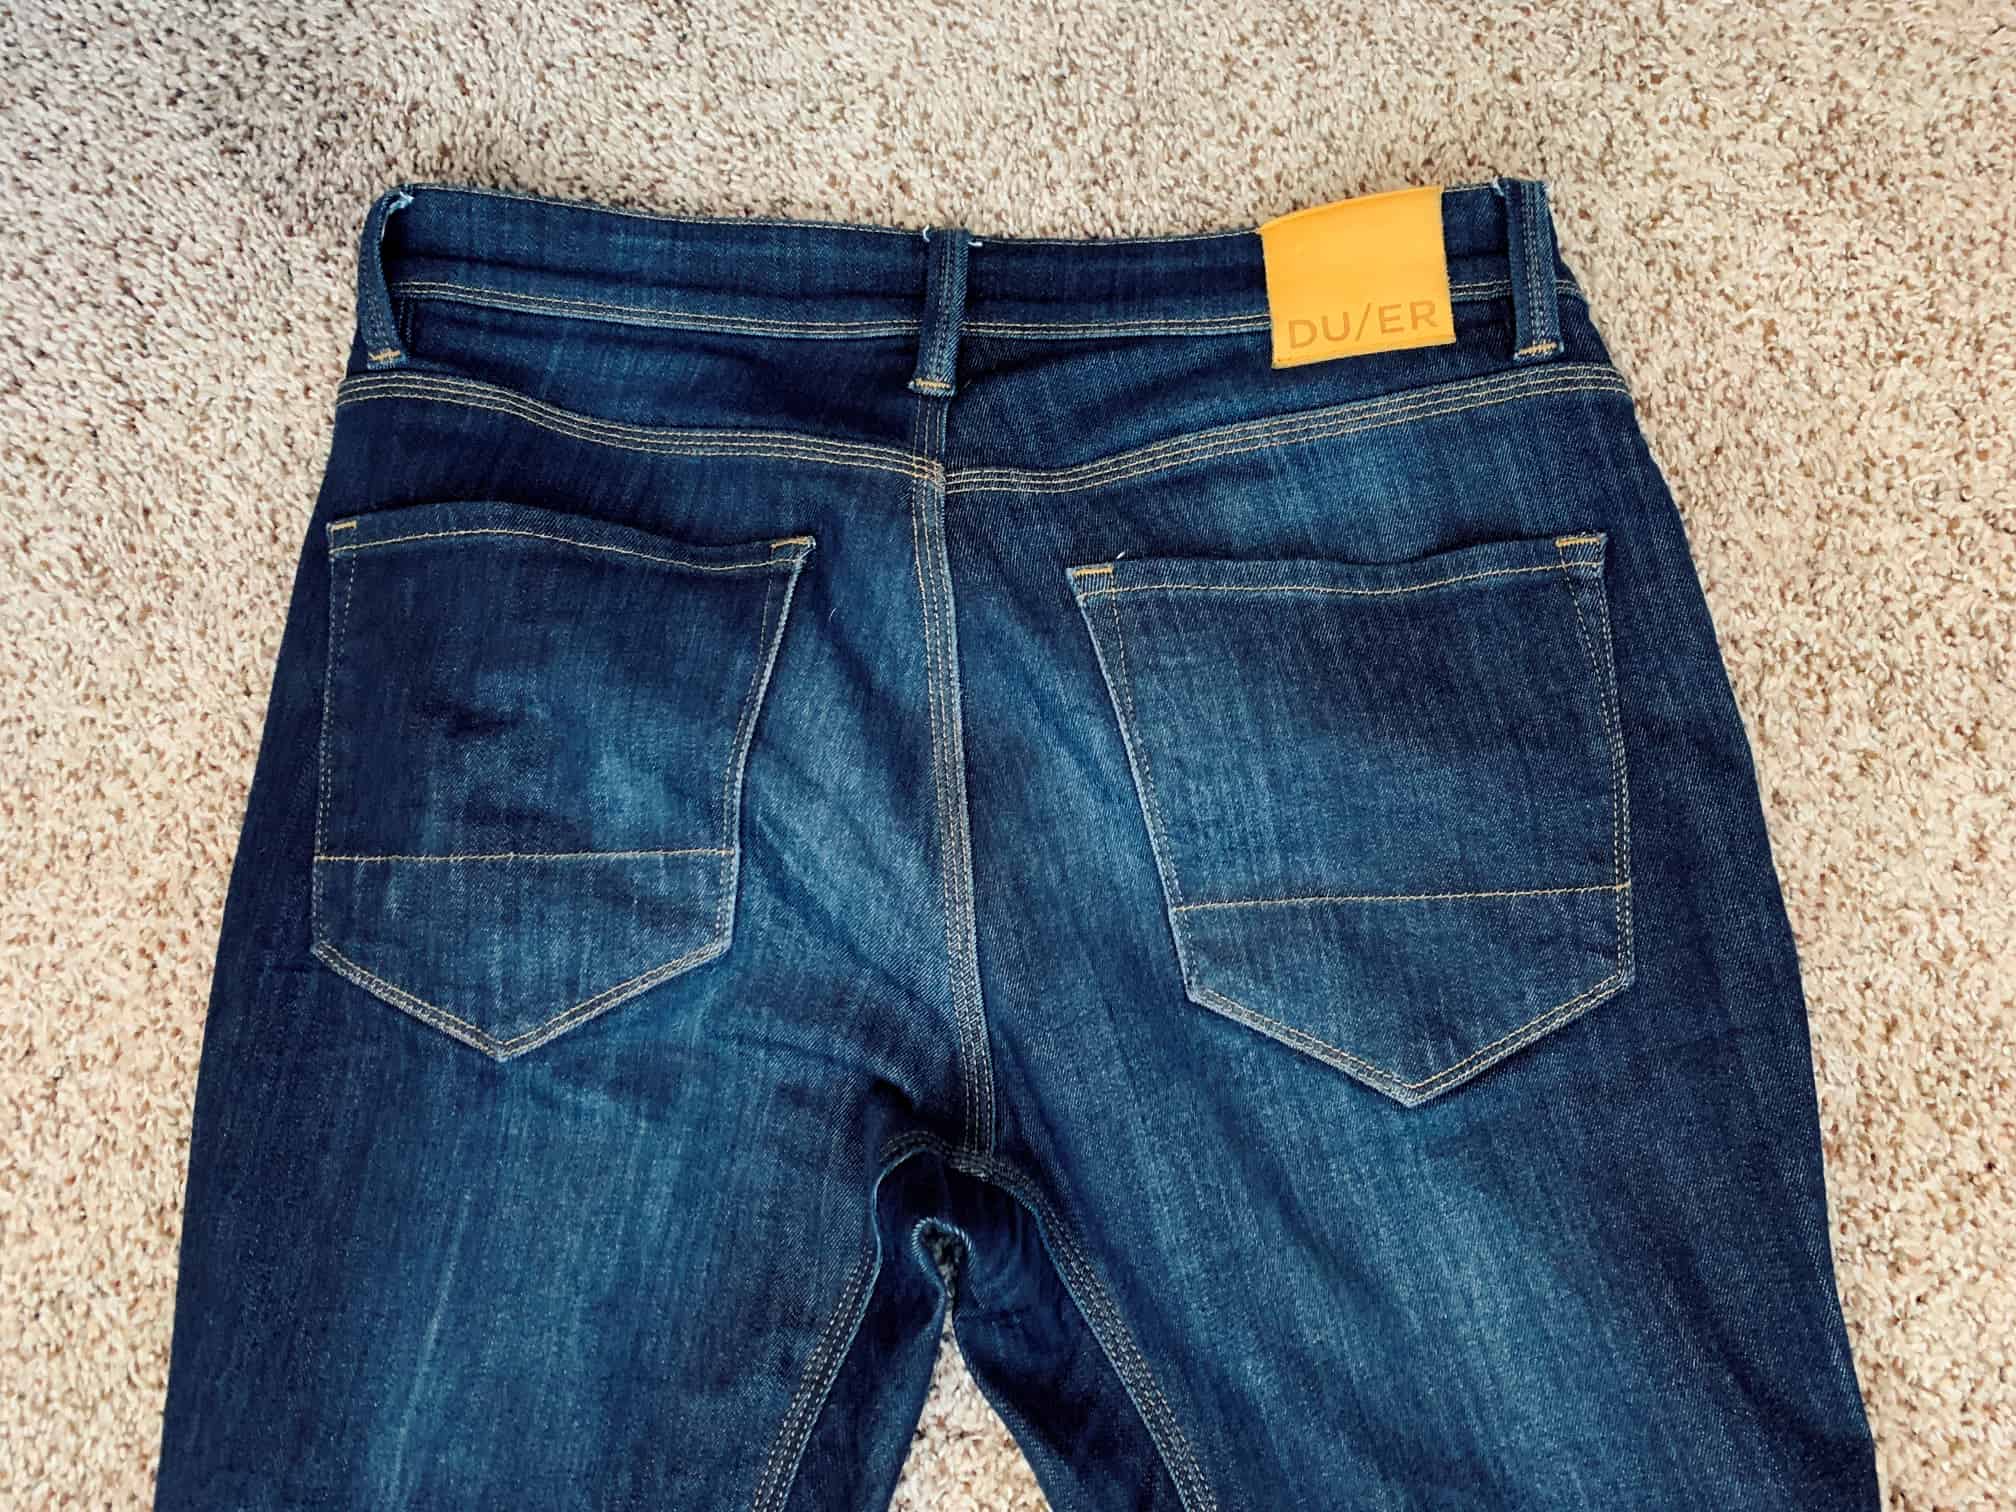 Duer Jean Review: Is Duer the ultimate Jean? 18